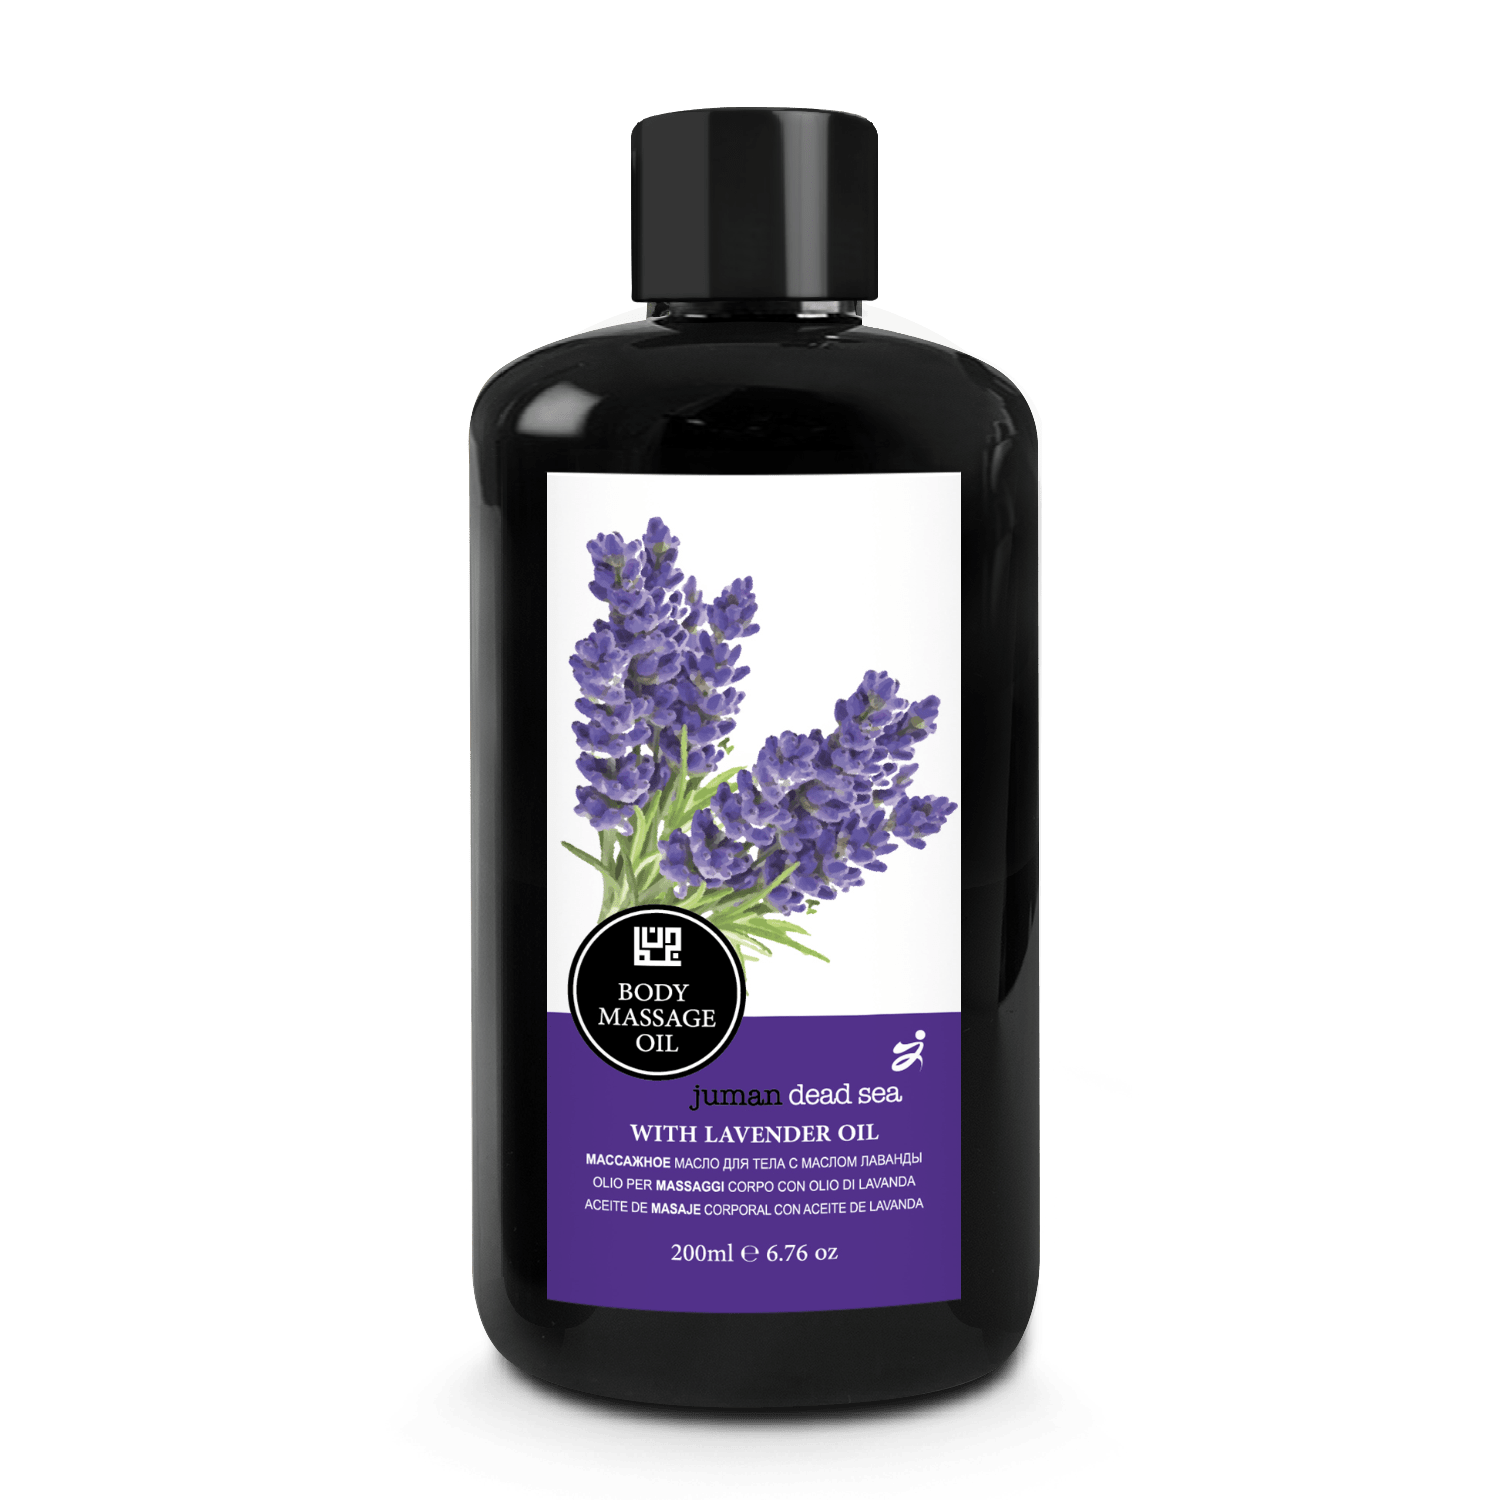 Body Massage Oil with Lavender Oil